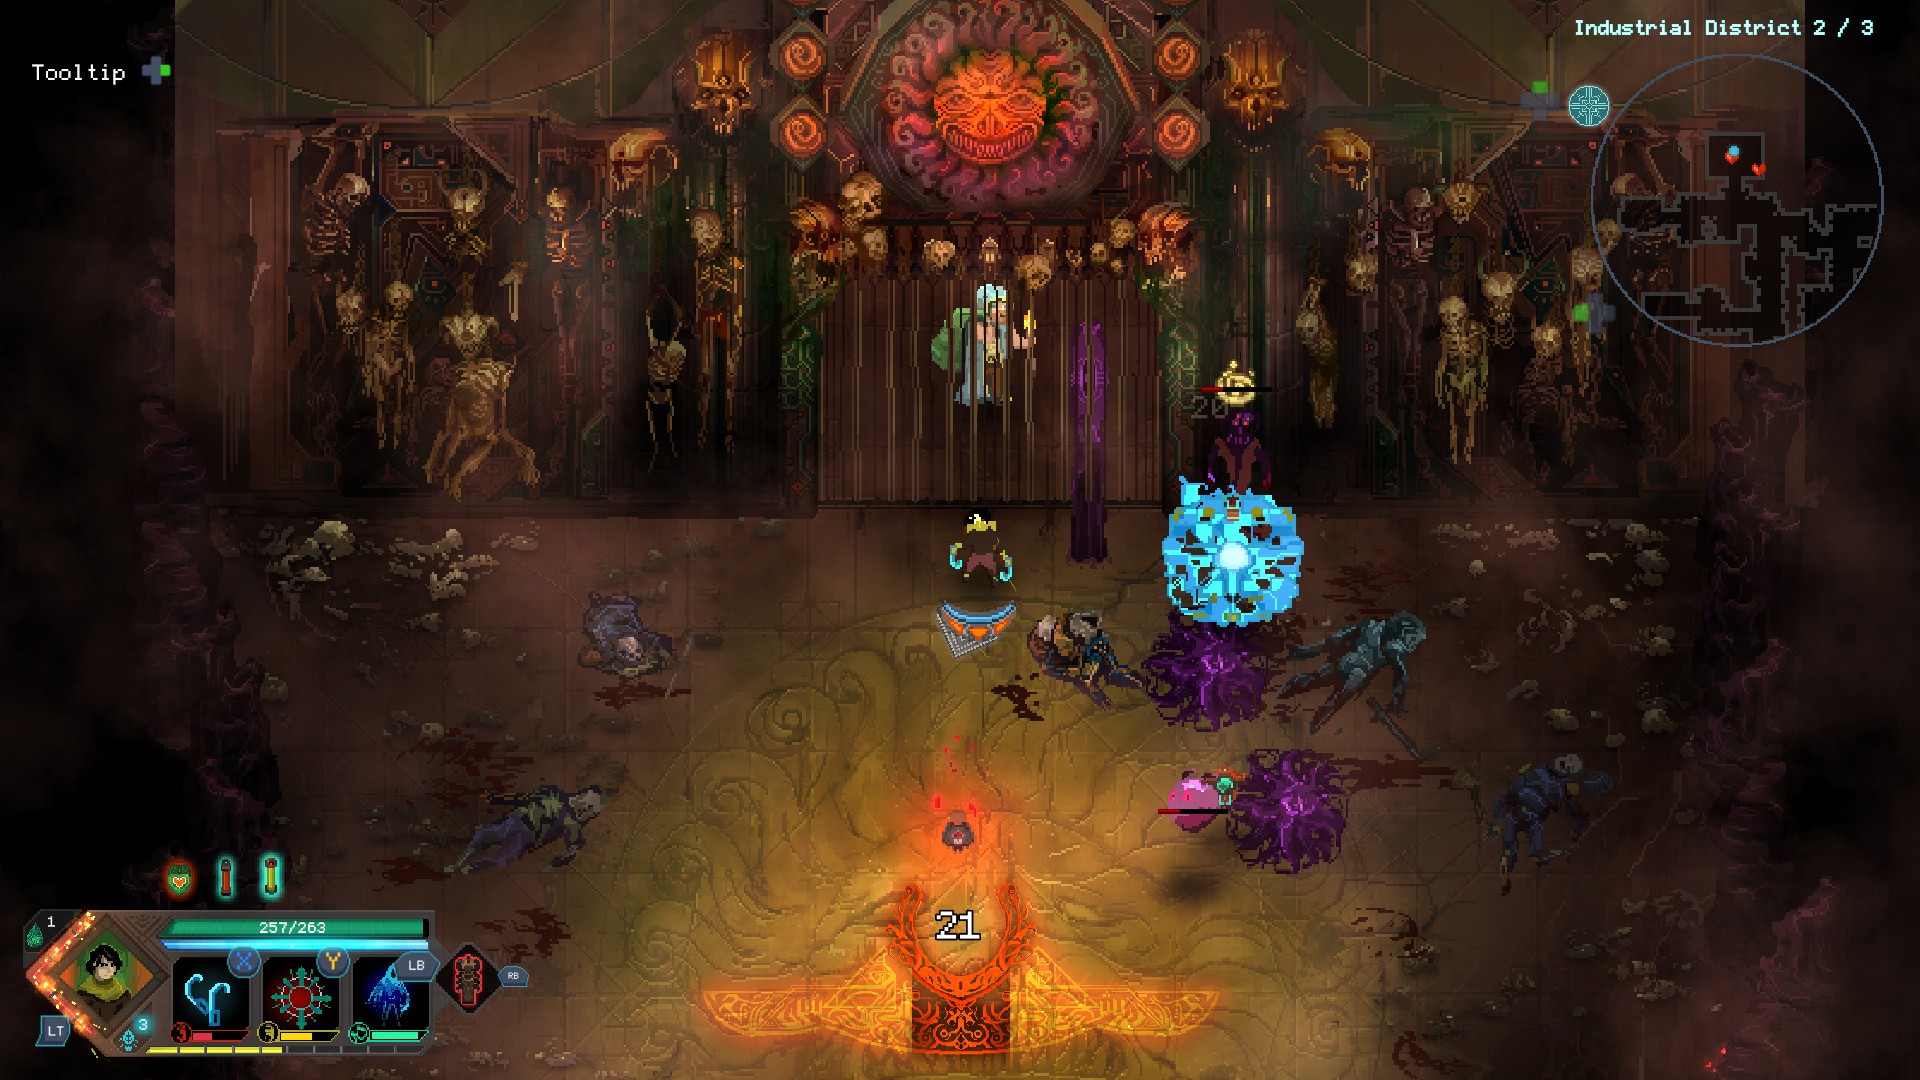 Children of Morta – IT RUNS IN THE FAMILY – Children of Morta is a story-driven hack'n'slash game with roguelite elements where you help family of Bergsons defend Mount Morta against the